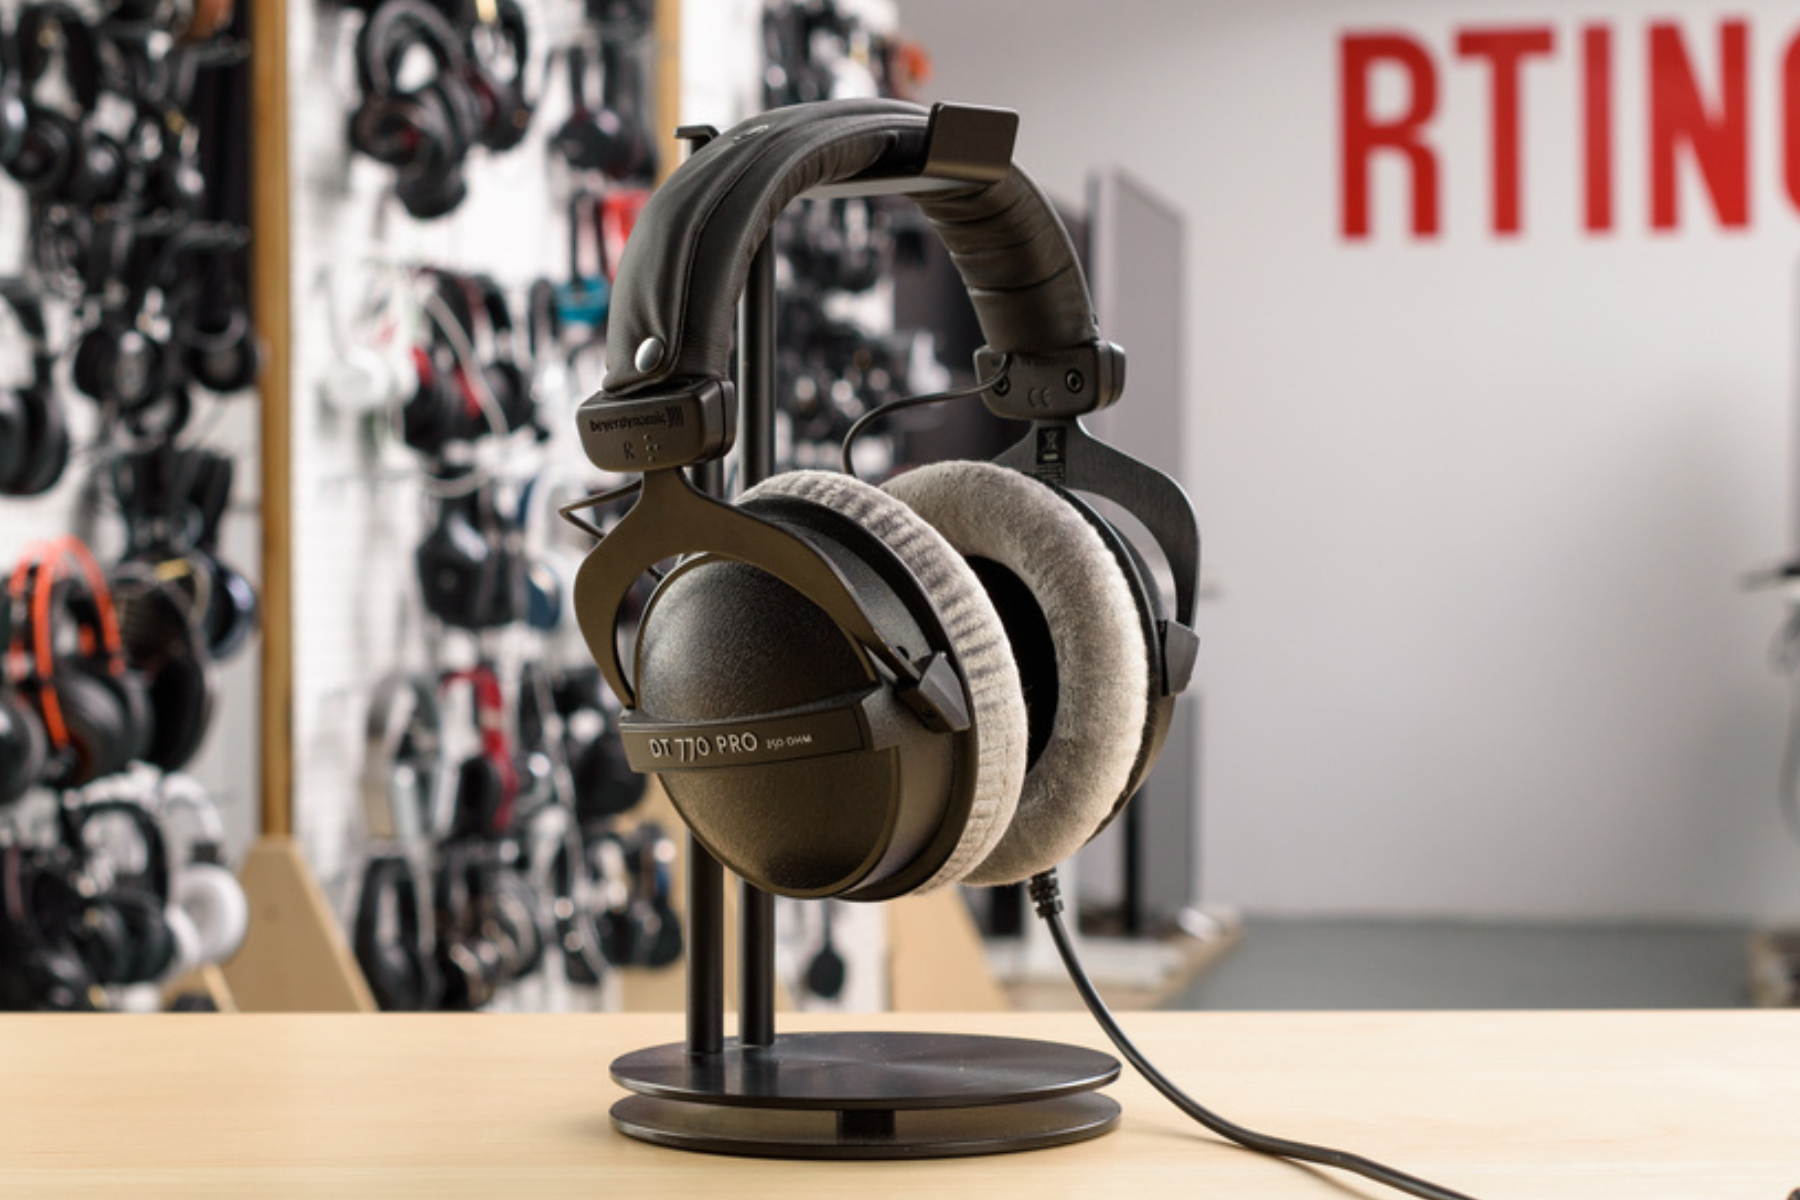 A closed-back over-ear headphone model, the Beyerdynamic DT 770 Pro, is seen resting on a flat surface